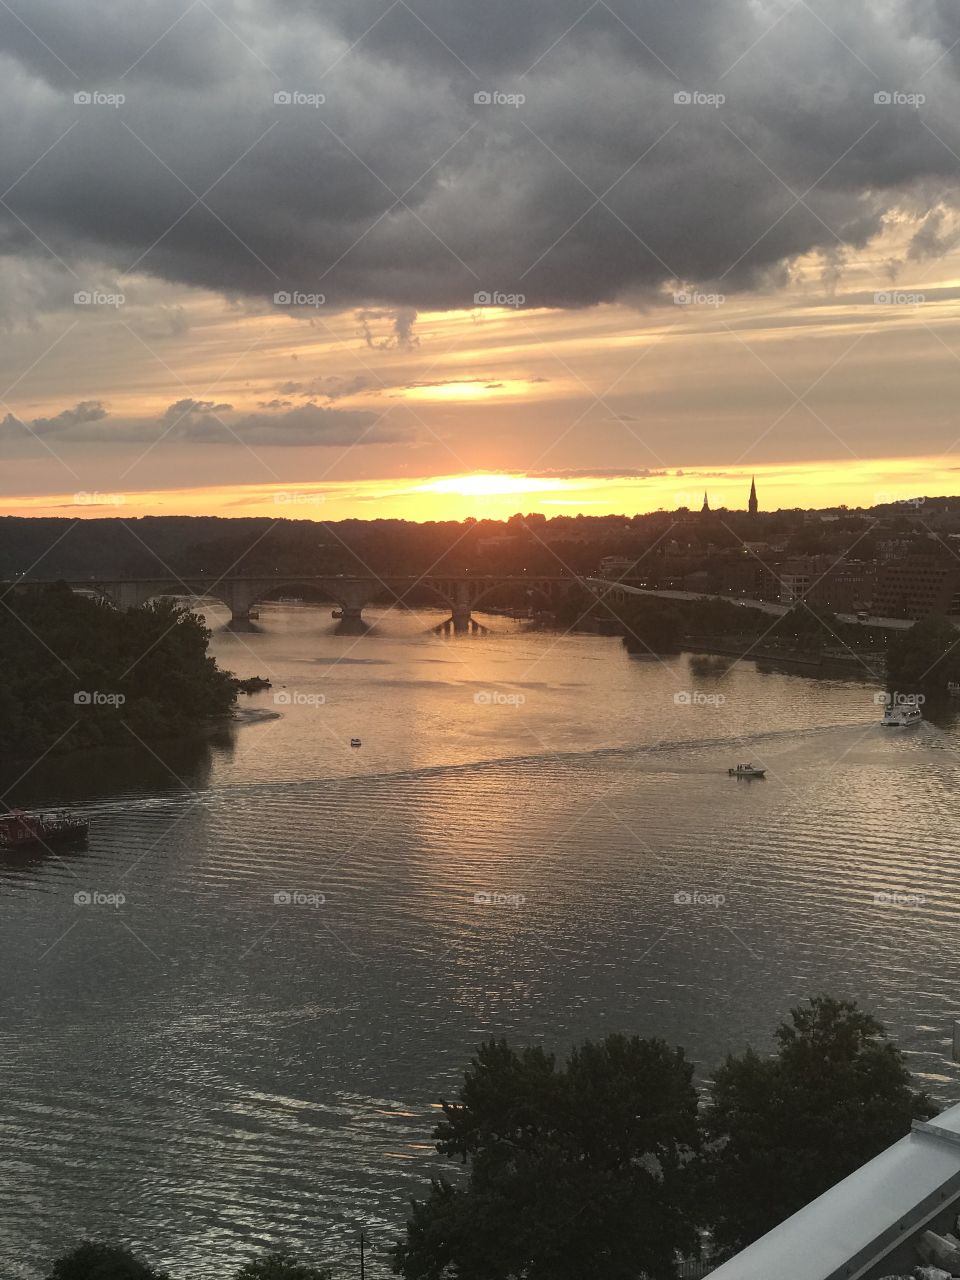 Beautiful sunset over the Potomac river. At dusk. You can see a bridge over the water. Calm, peaceful river with reflection. 